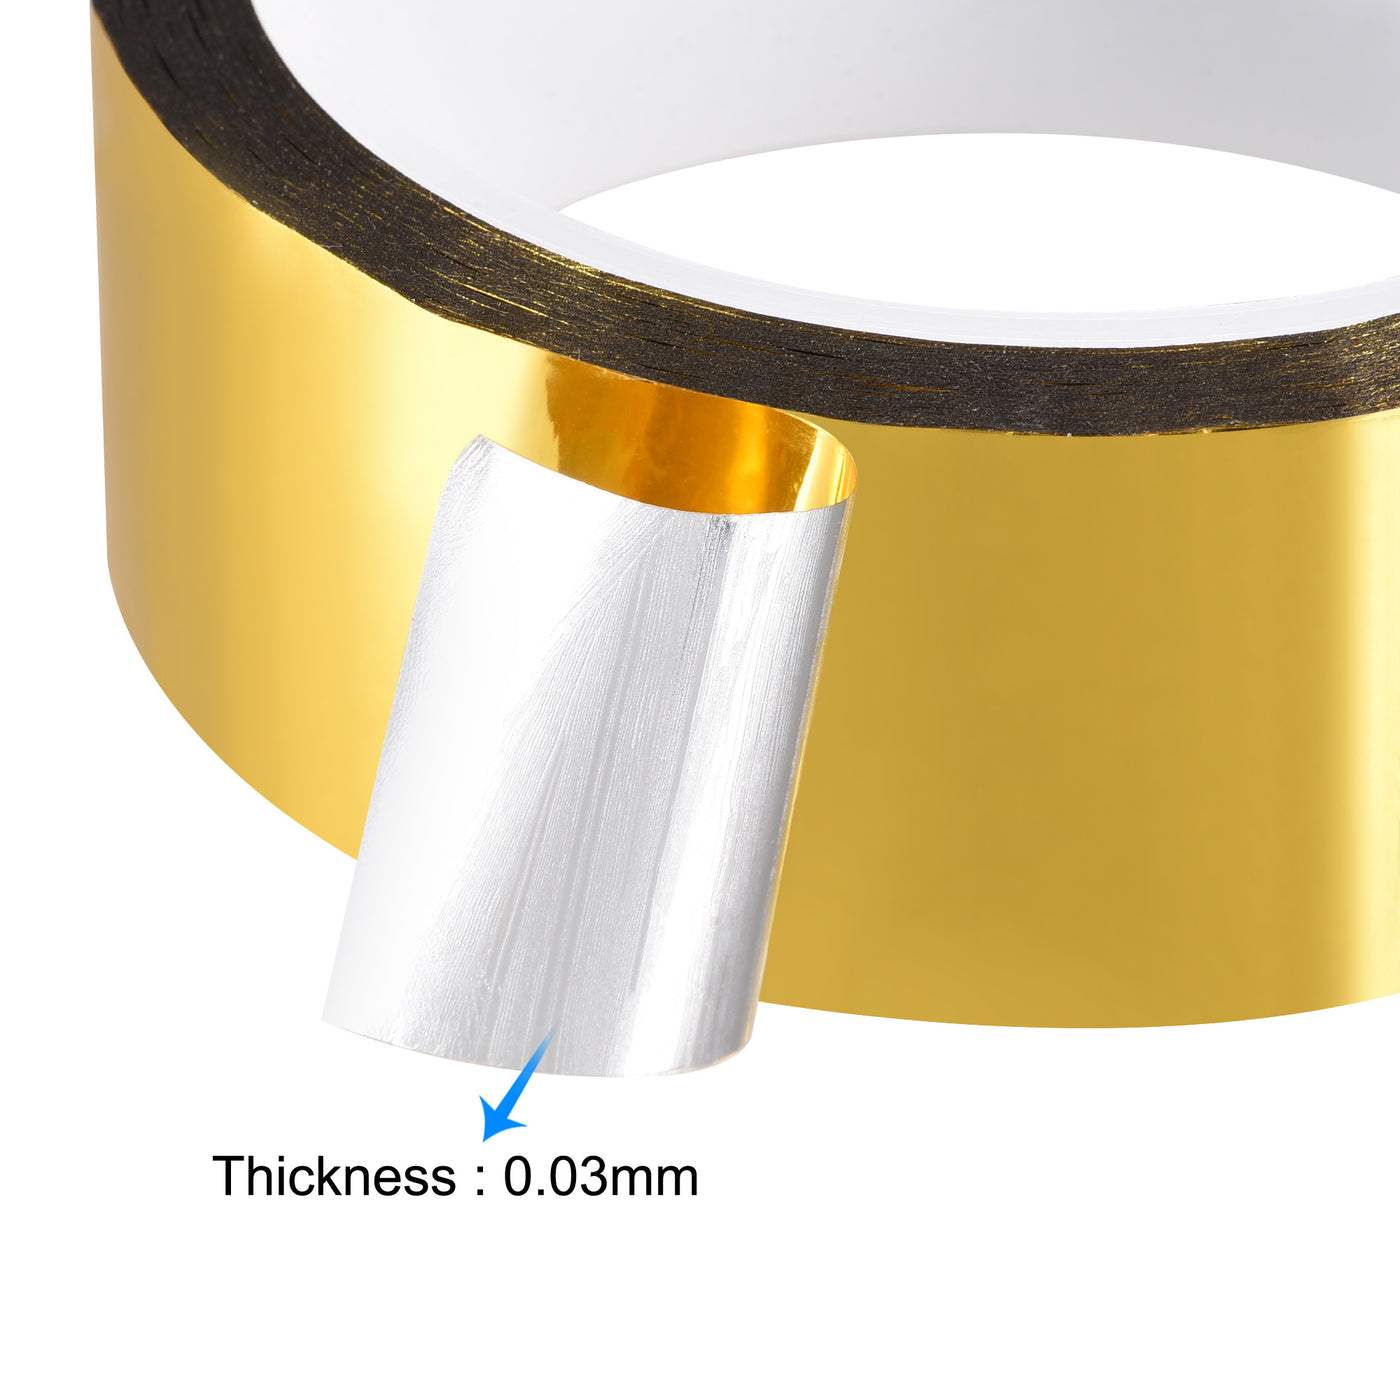 uxcell Uxcell Gold Tone Metalized Tape 40mm x 50m/164ft Decor Tape for Graphic Arts